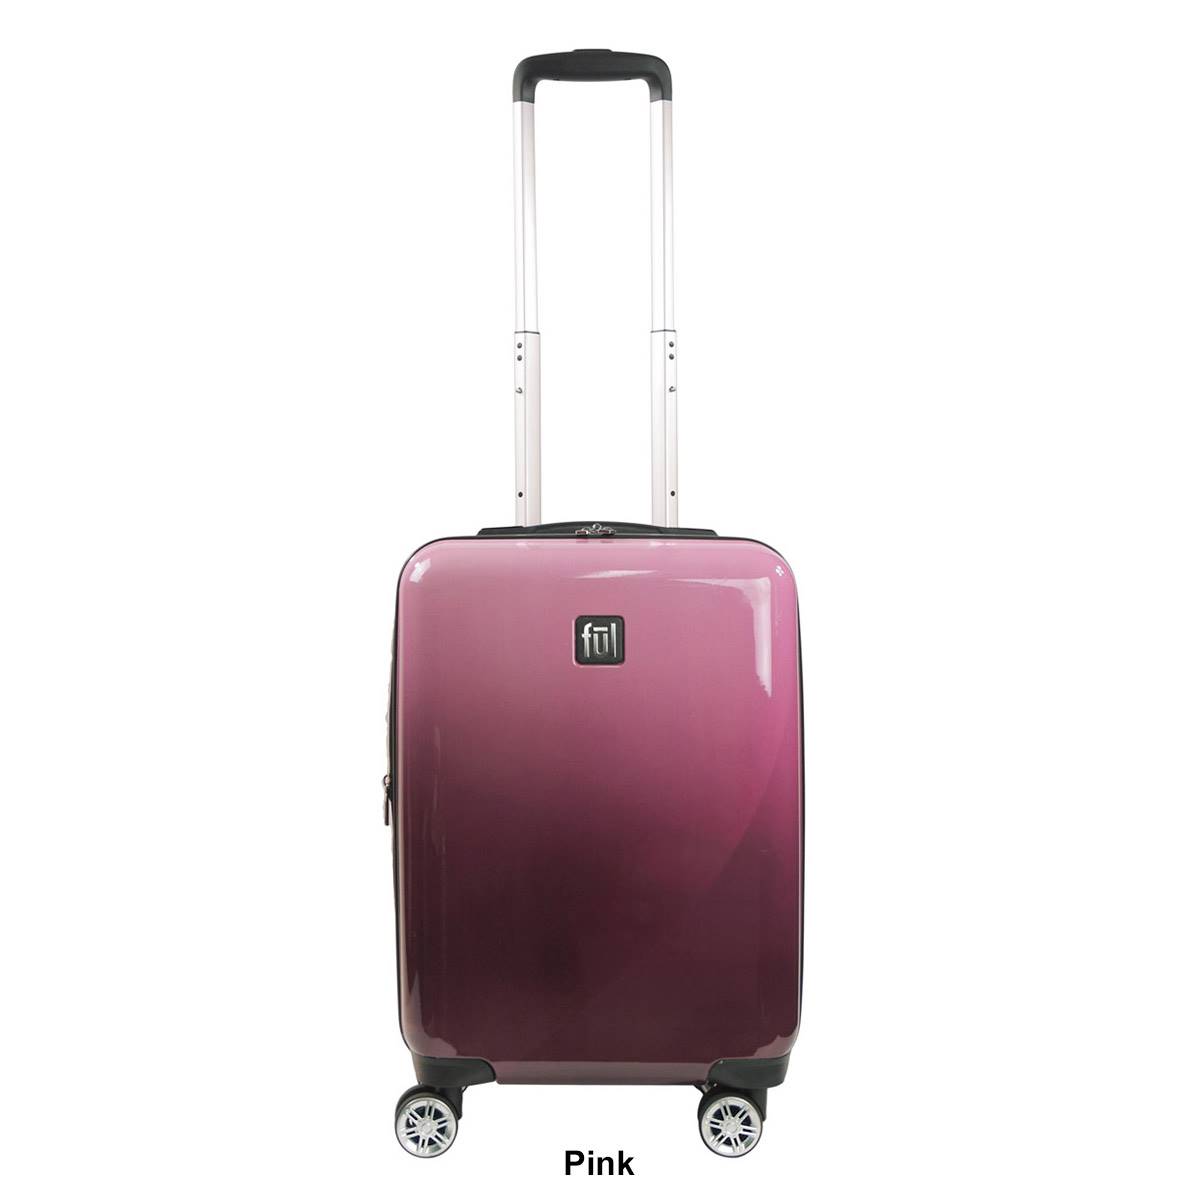 FUL 22in. Impulse Ombre Hardside Carry-On Spinner Luggage